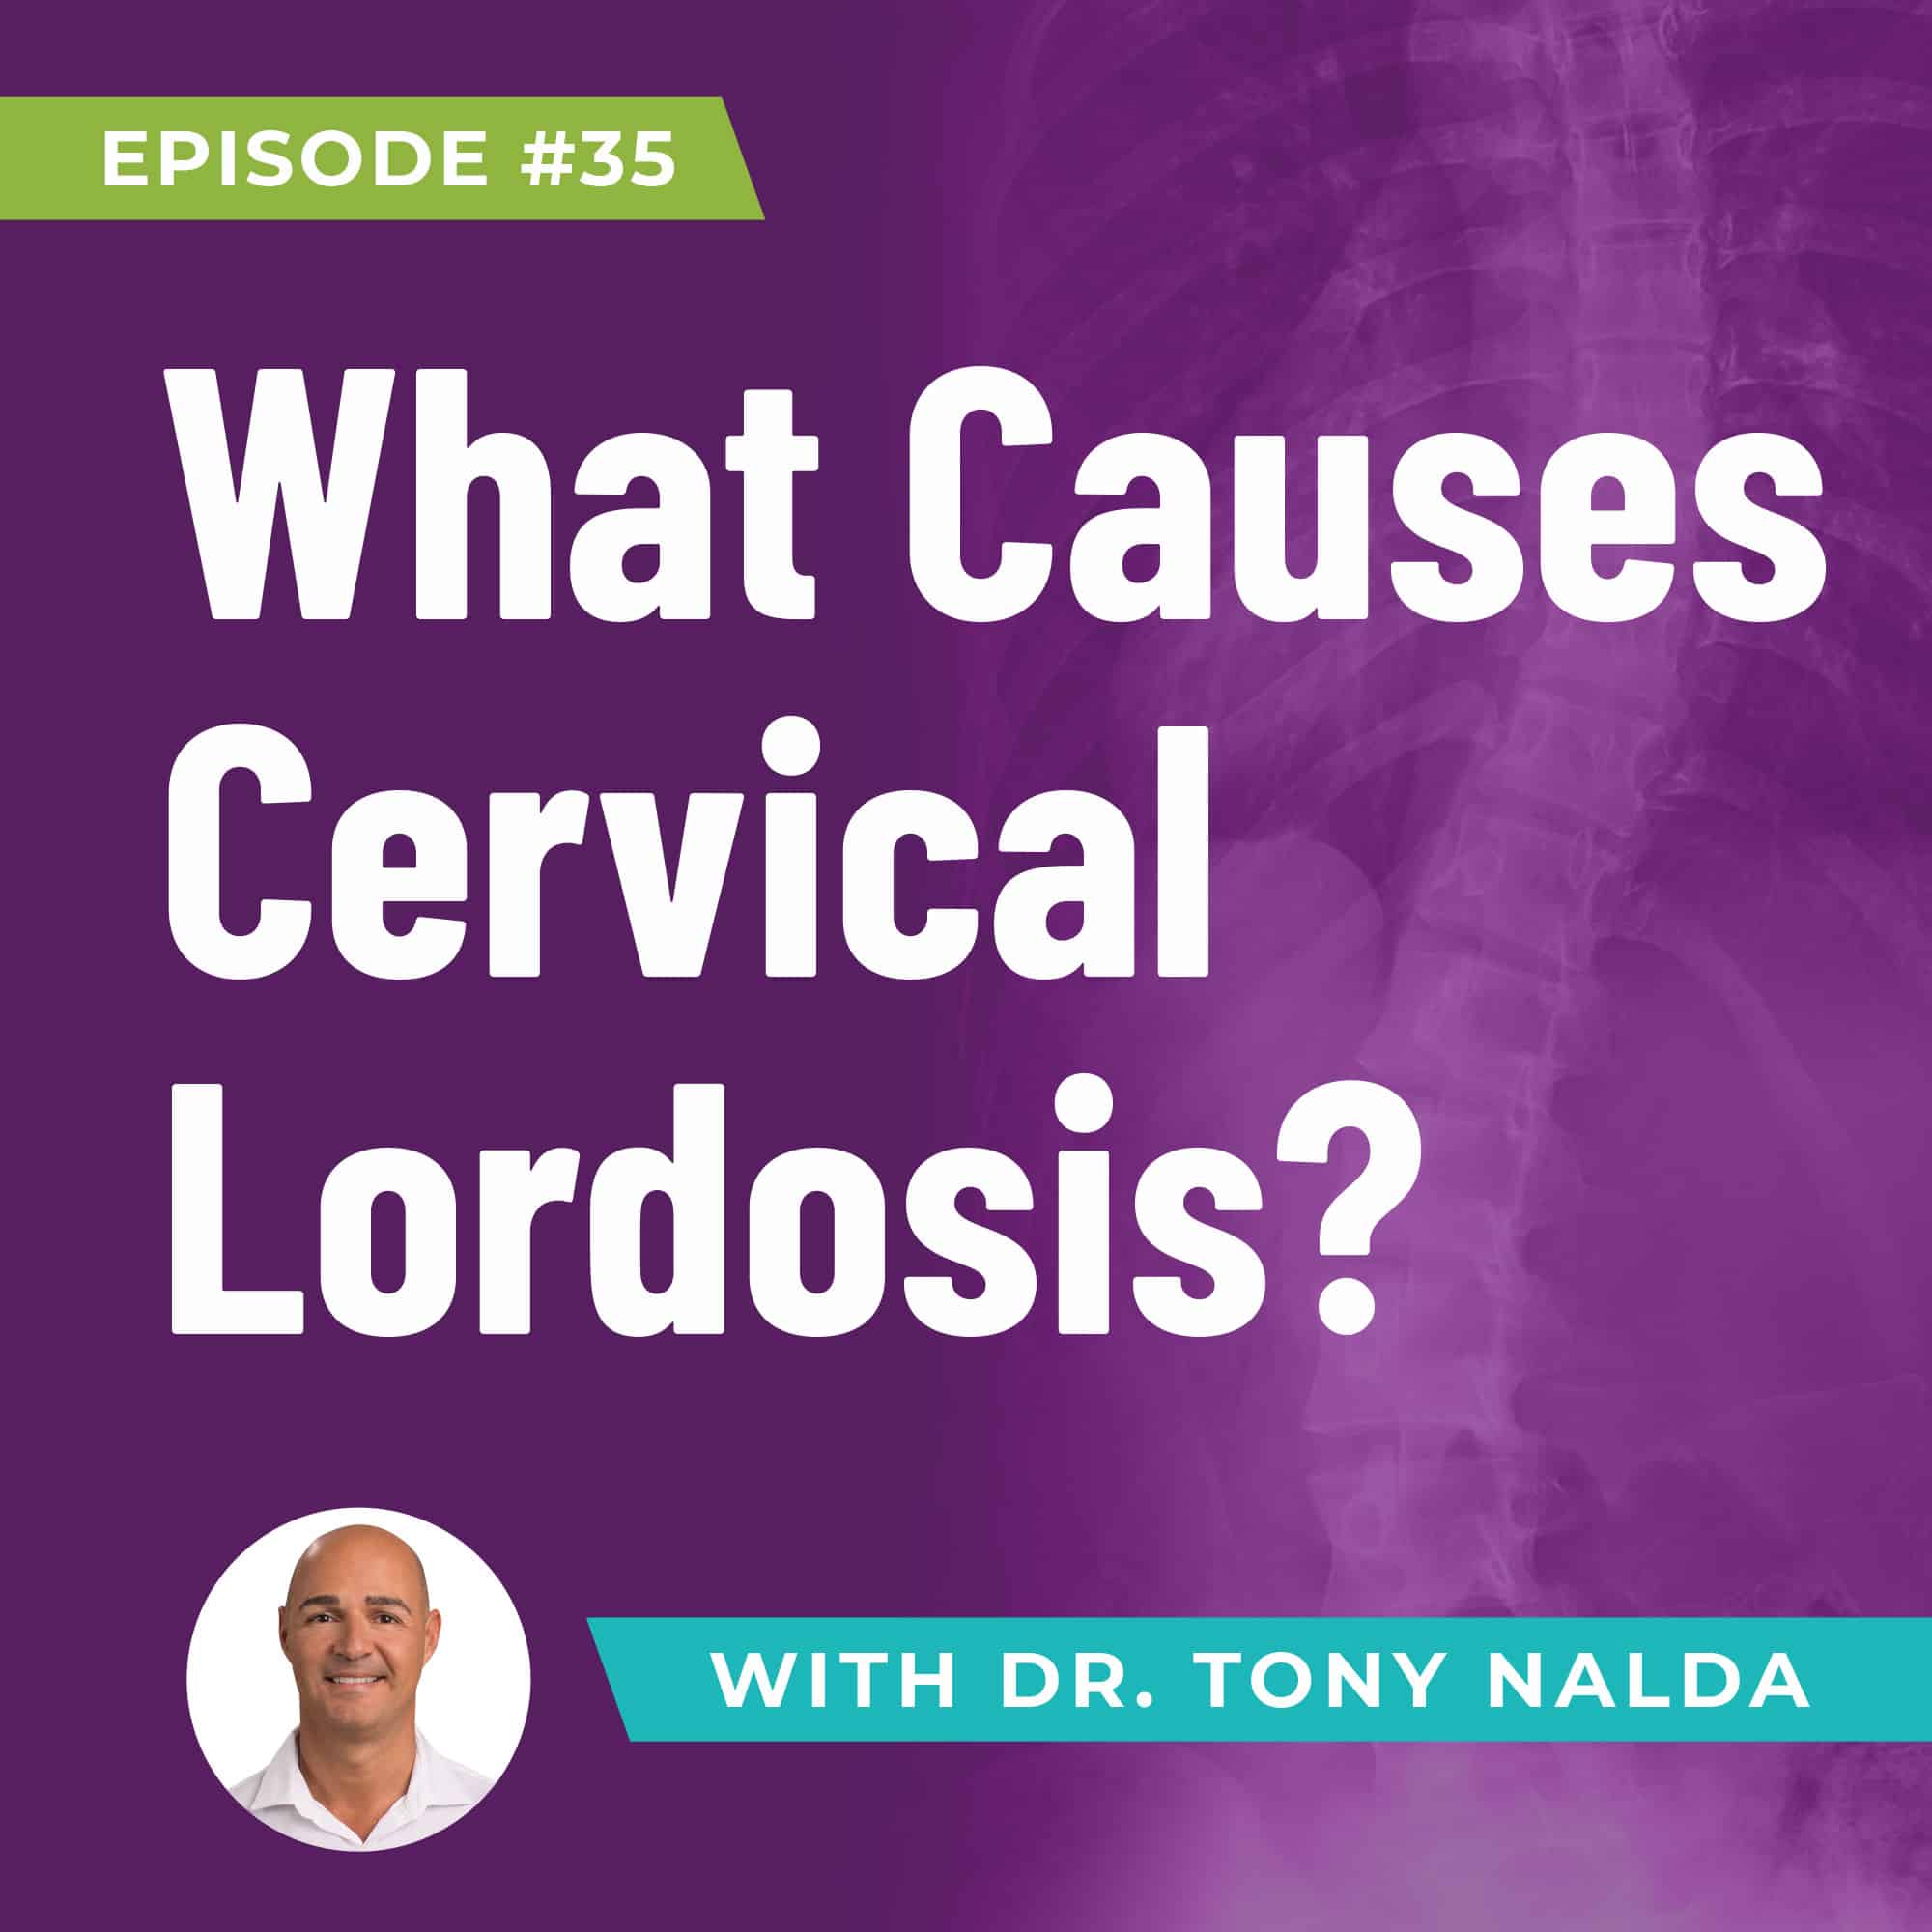 ep 35 What Causes Cervical Lordosis